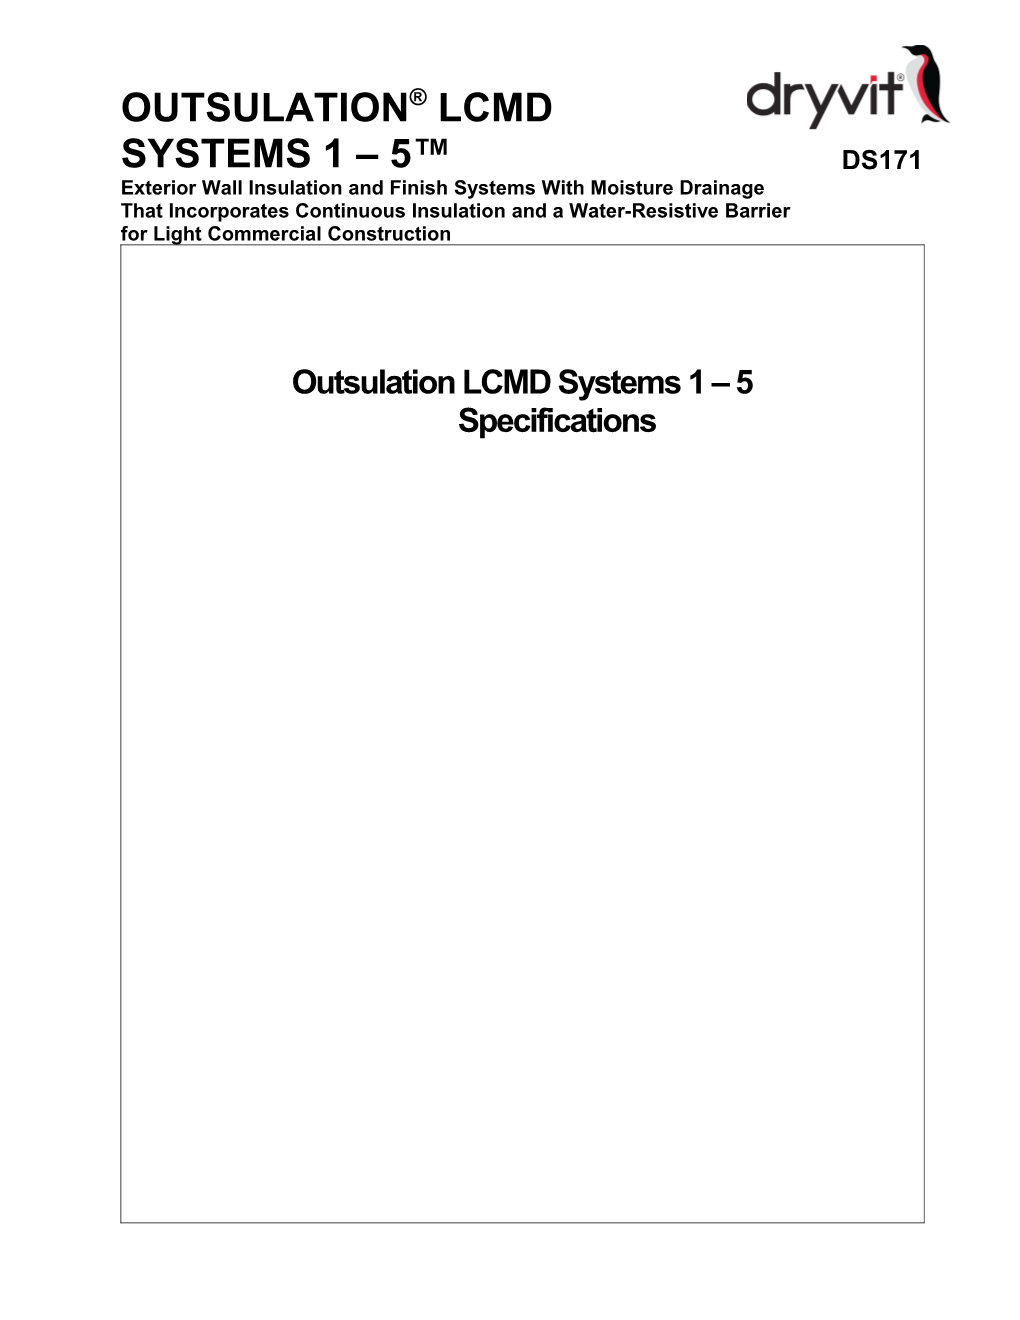 Outsulation LCMD Systems 1-5 - DS171